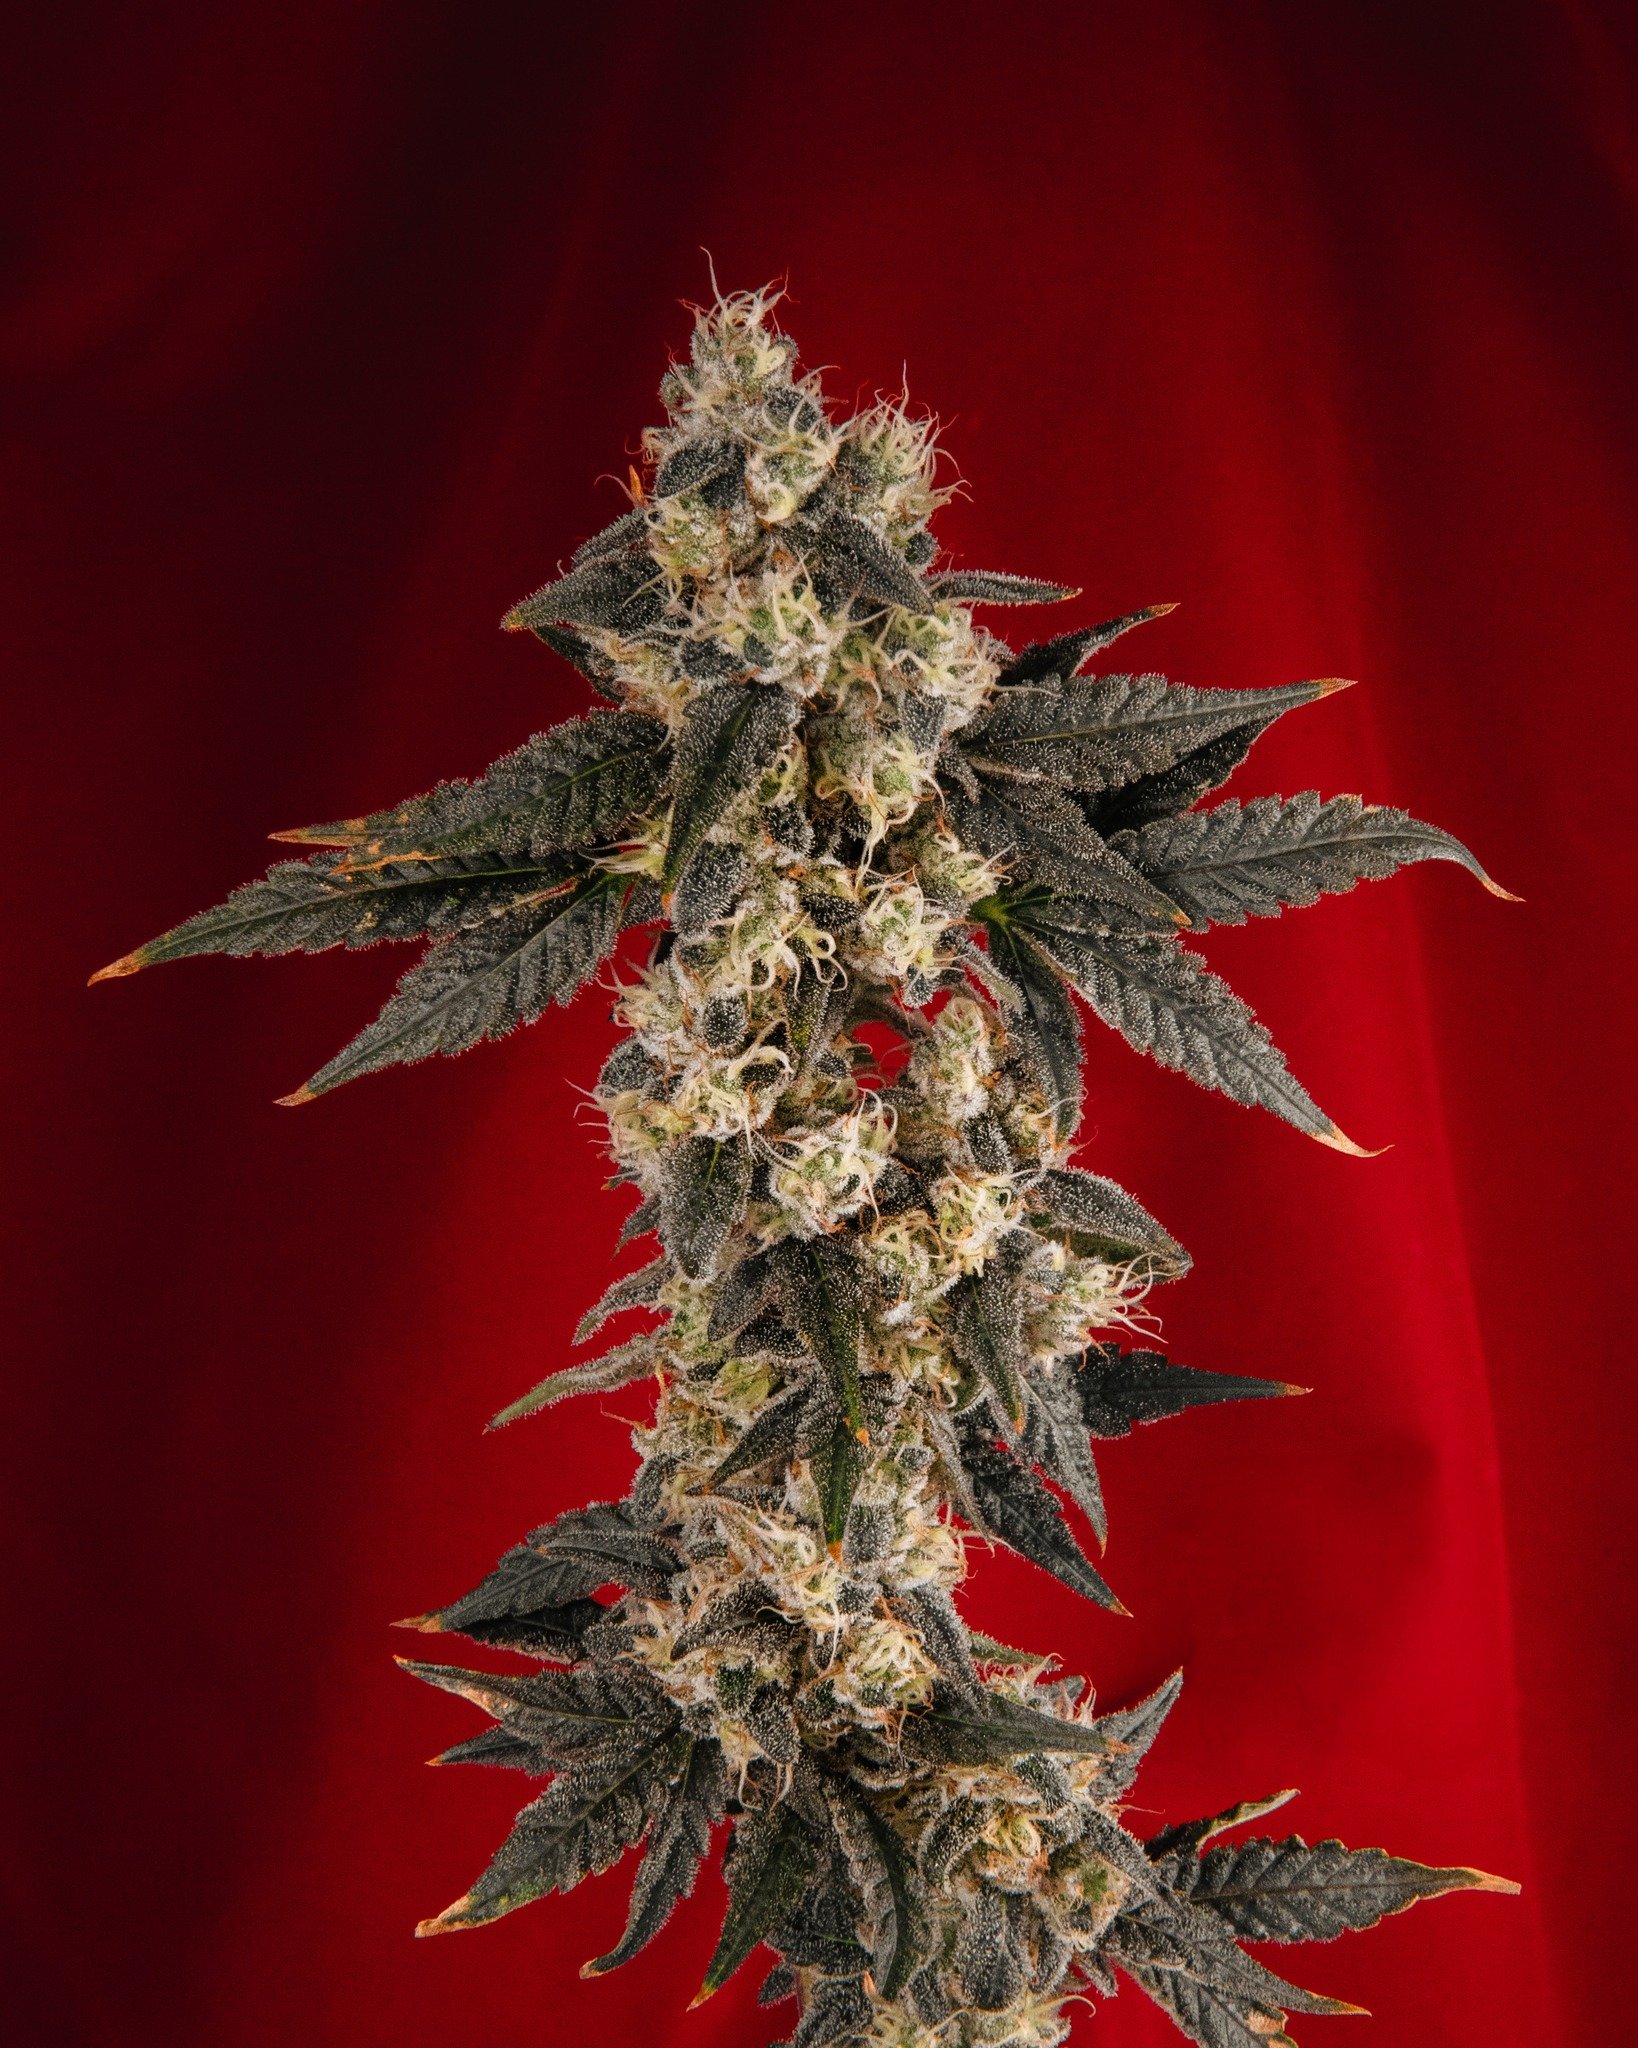 Well it&rsquo;s a nice day for&hellip; some quality time with WHITE WEDDING. 

WHITE WEDDING is a celebratory cross between popular strains Wedding Cake X Girl Scout Cookies.

***This product has intoxicating effects and may be habit forming. Marijua